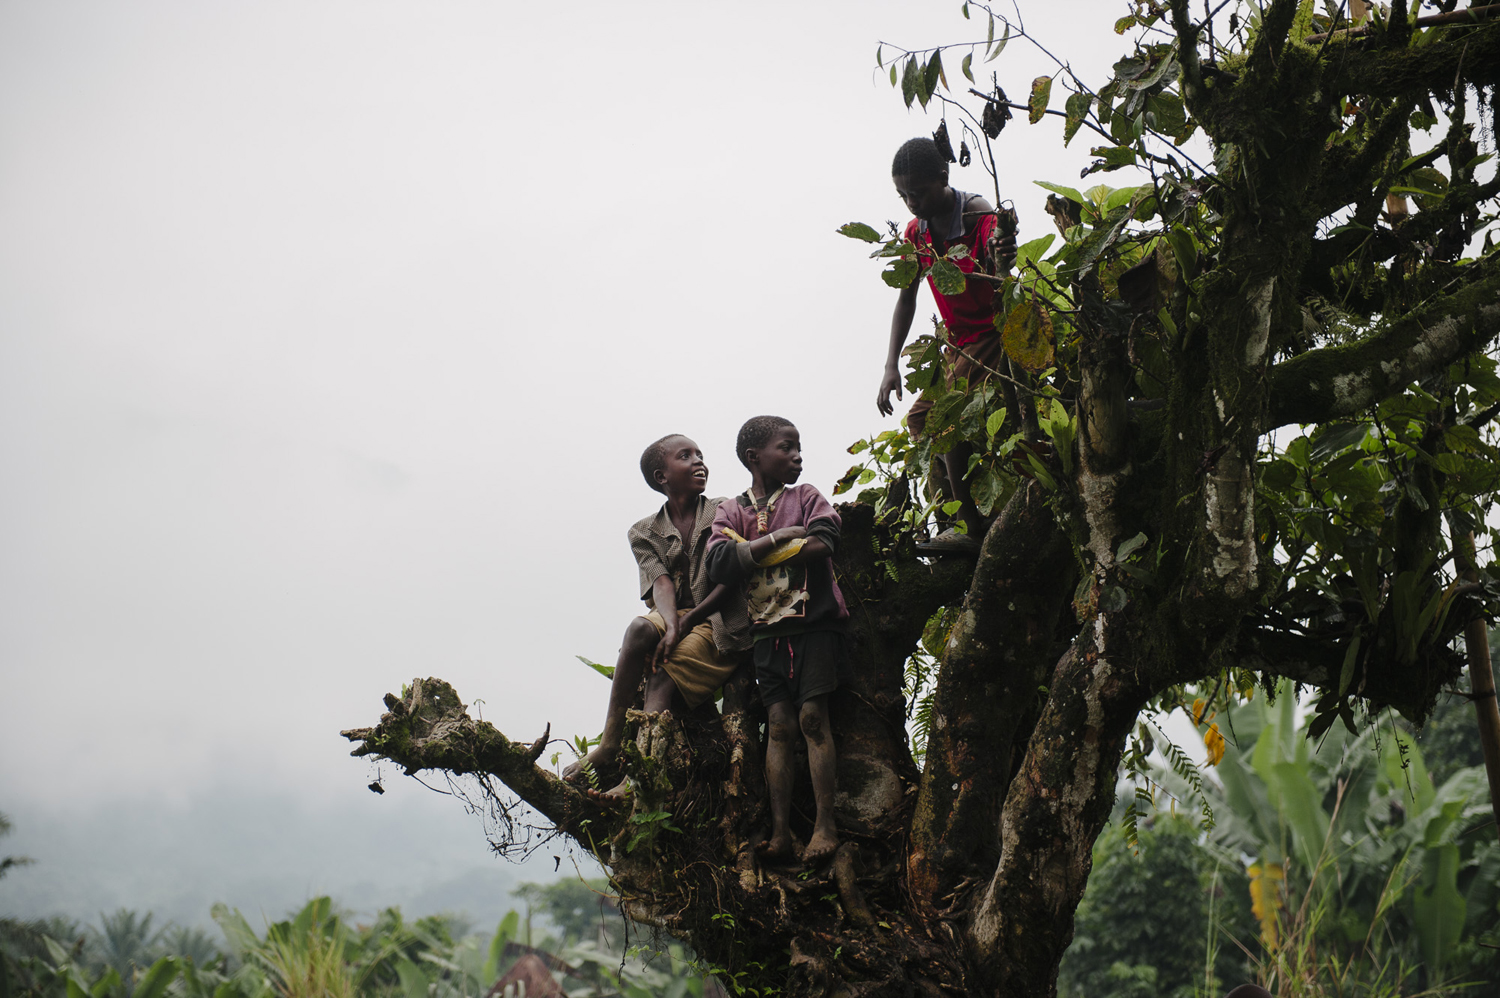 Children sit on the branches of a tree in the village of Kishee. Aug 12, 2014.